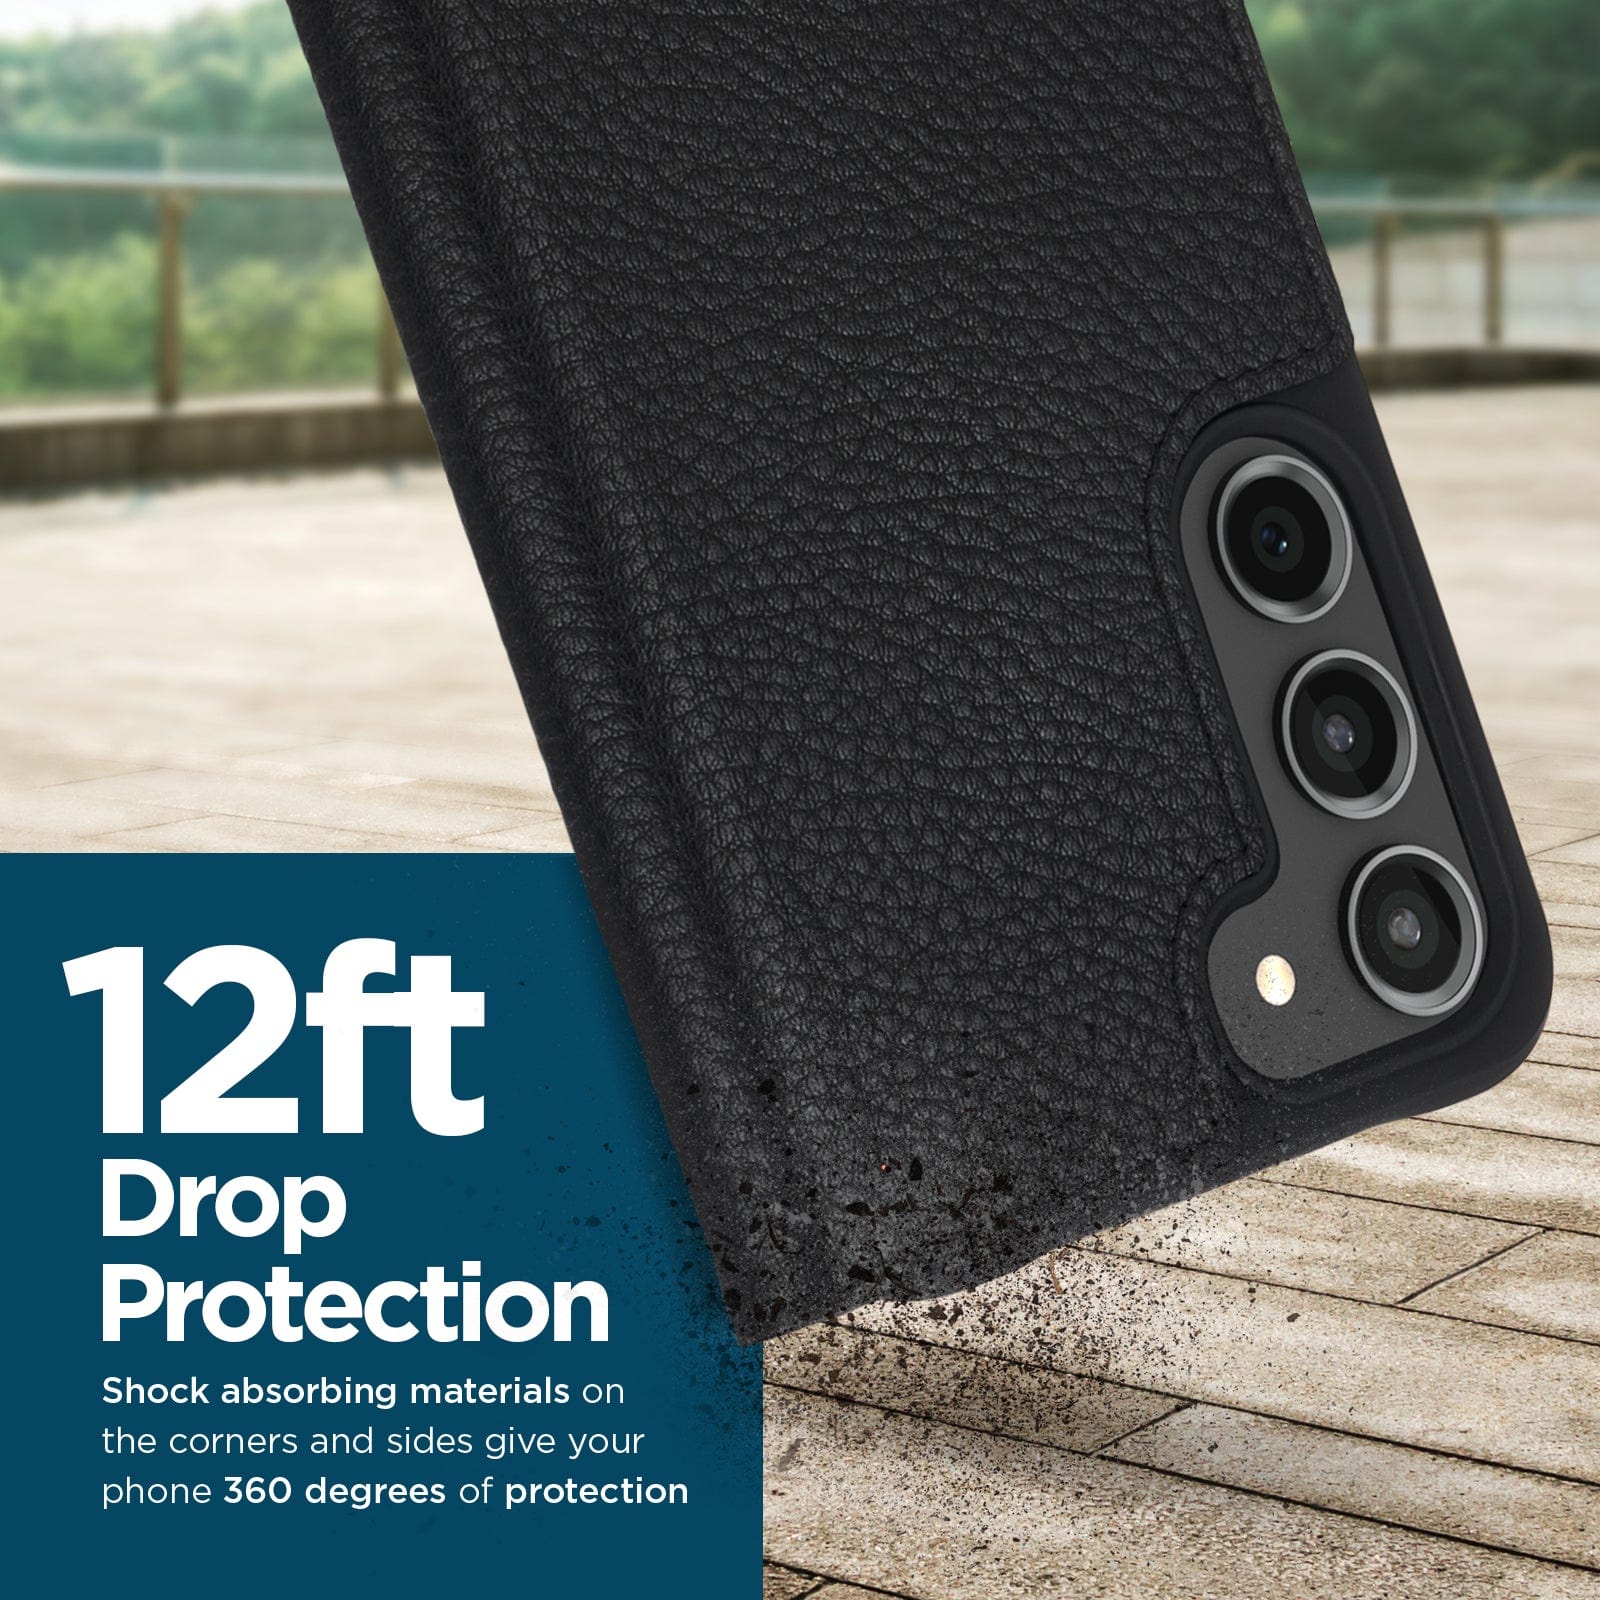 12FT DROP PROTECTION. SHOCK ABSORBING MATERIALS ON THE CORNERS AND SIDES GIVE YOUR PHONE 360 DEGREES OF PROTECTION.